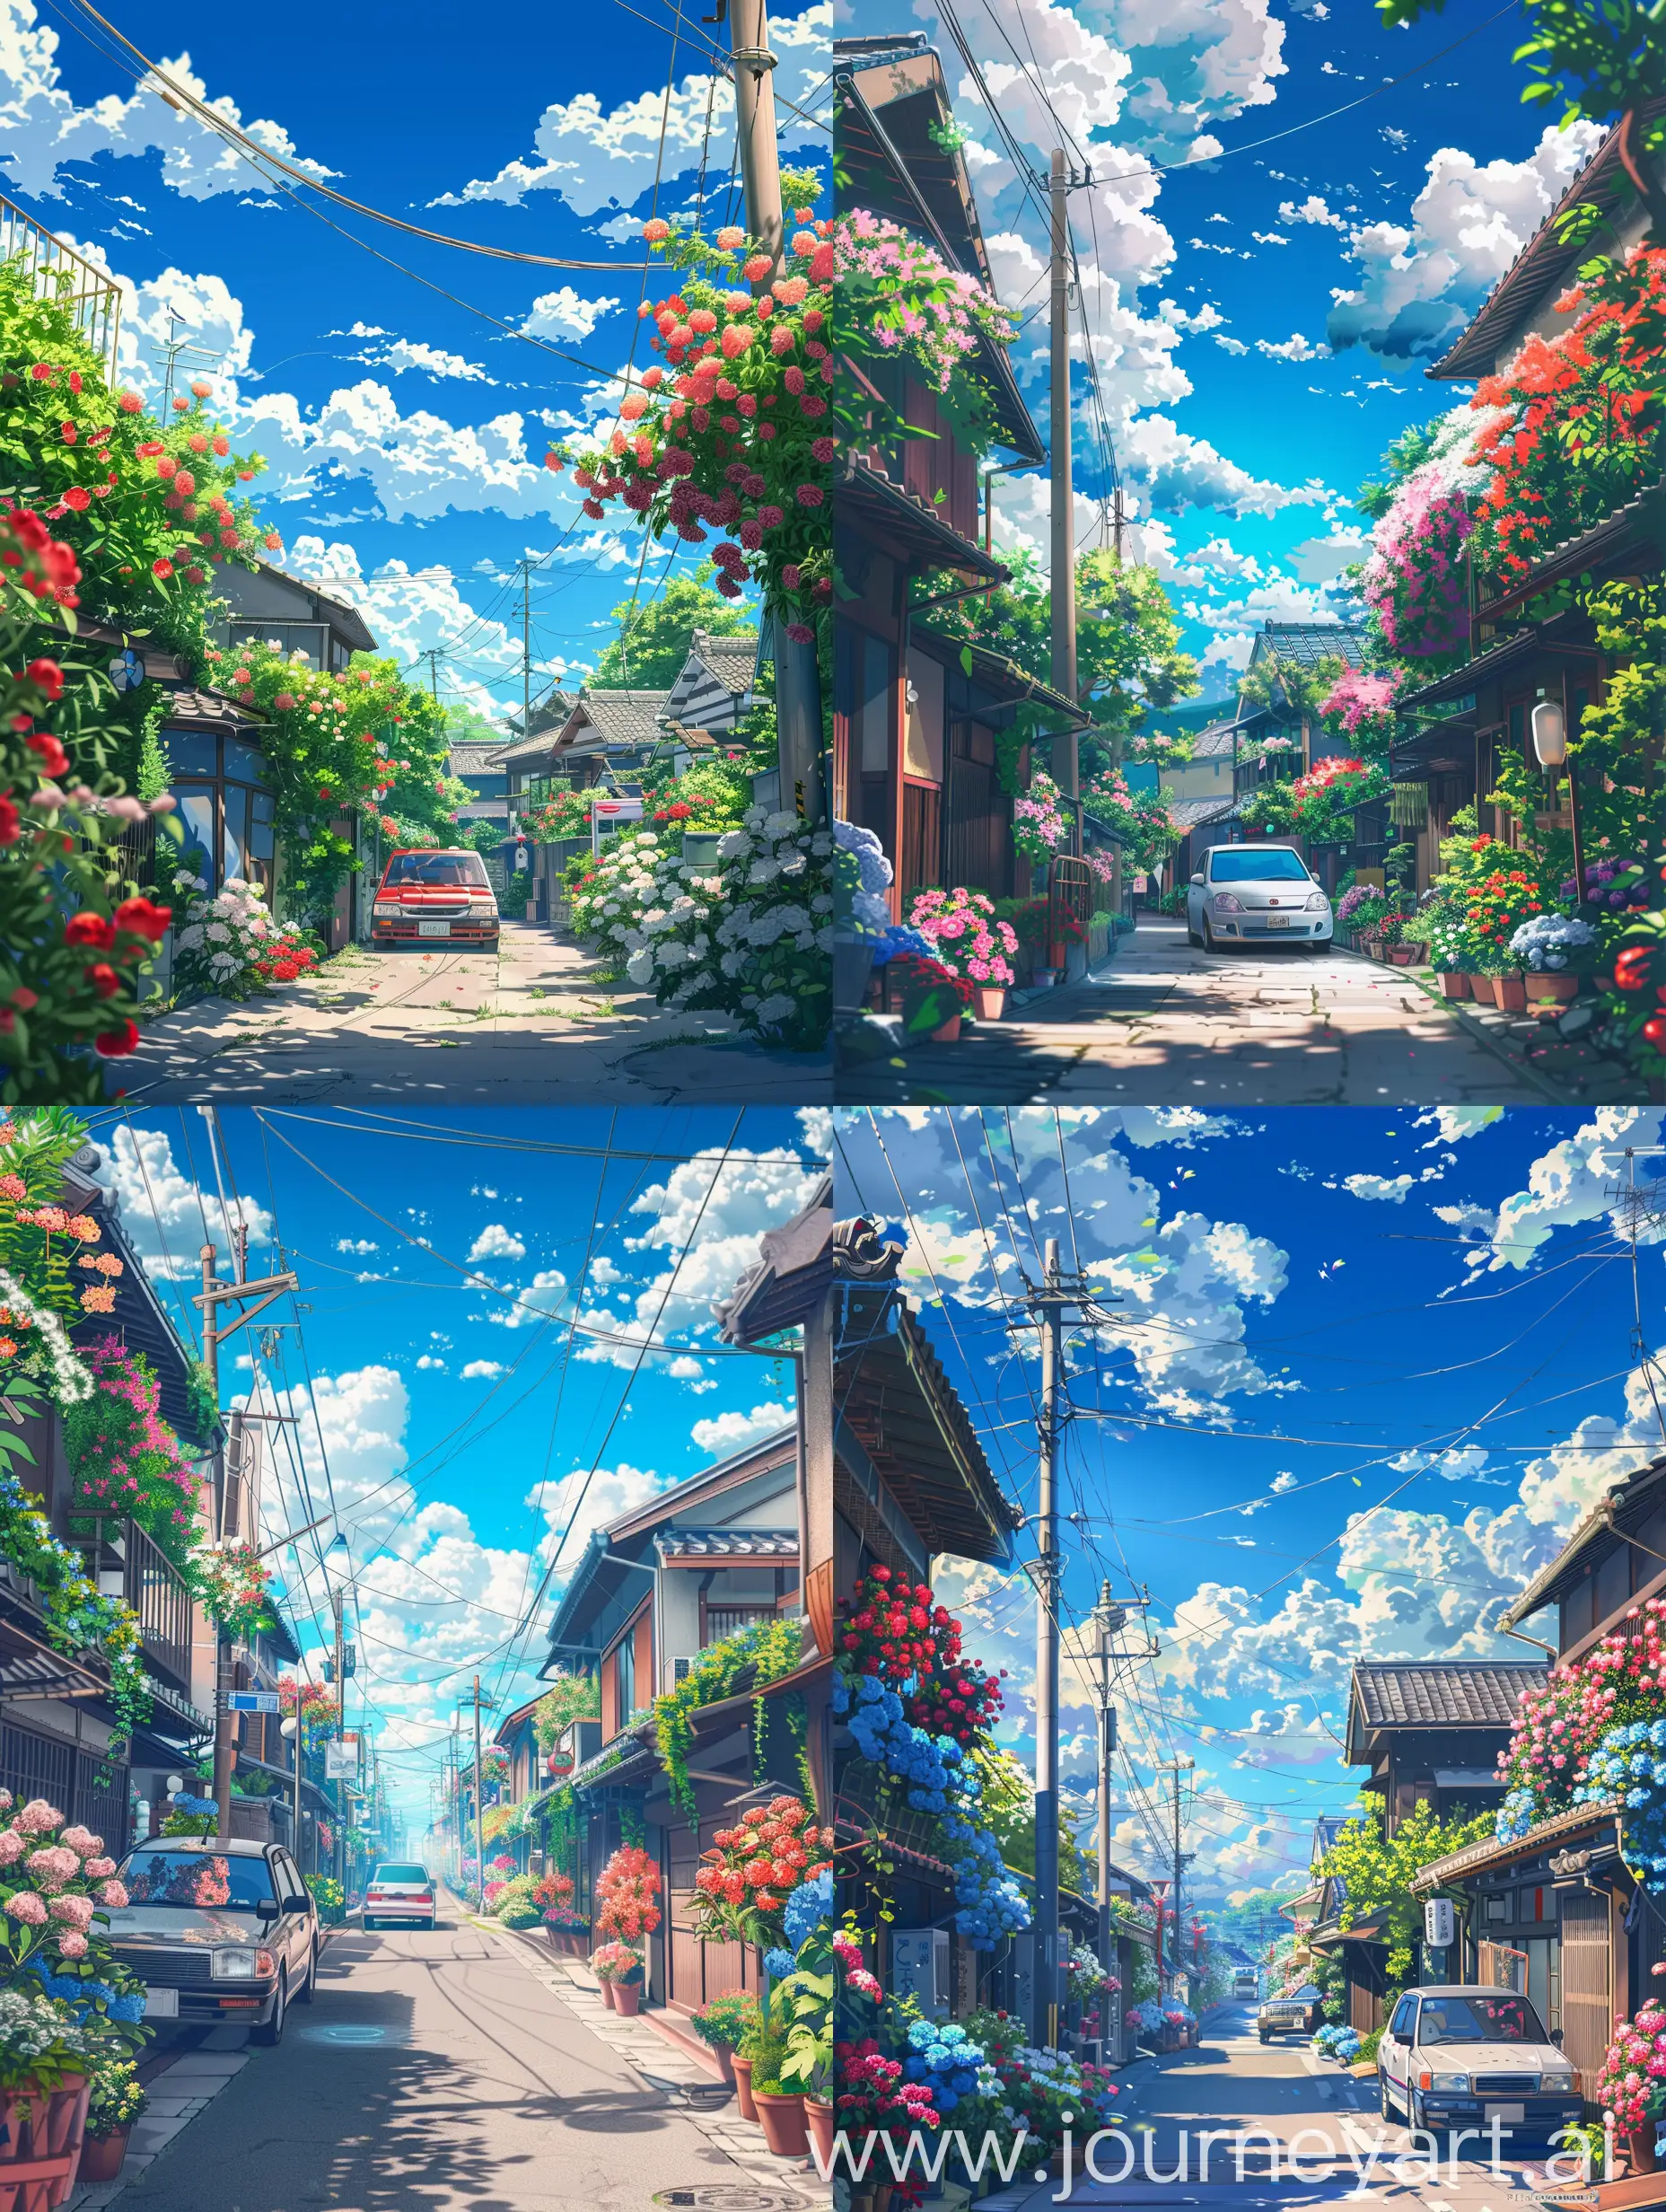 Charming-Anime-Style-Japanese-Street-with-Blooming-Flowers-and-Classic-Car